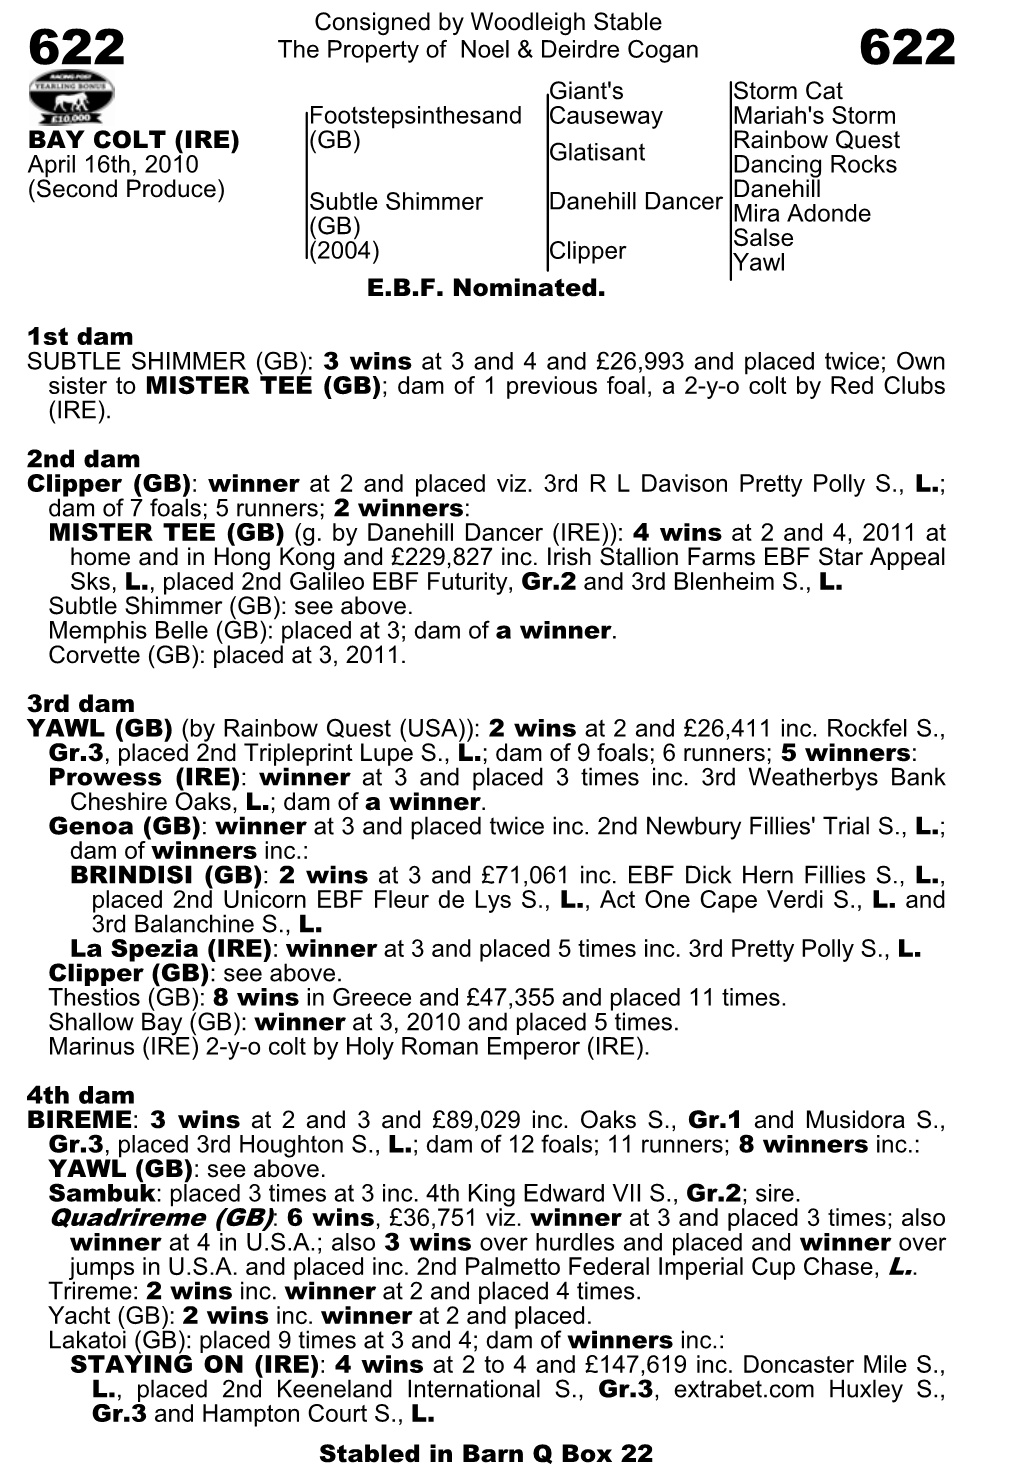 Consigned by Woodleigh Stable the Property of Noel & Deirdre Cogan